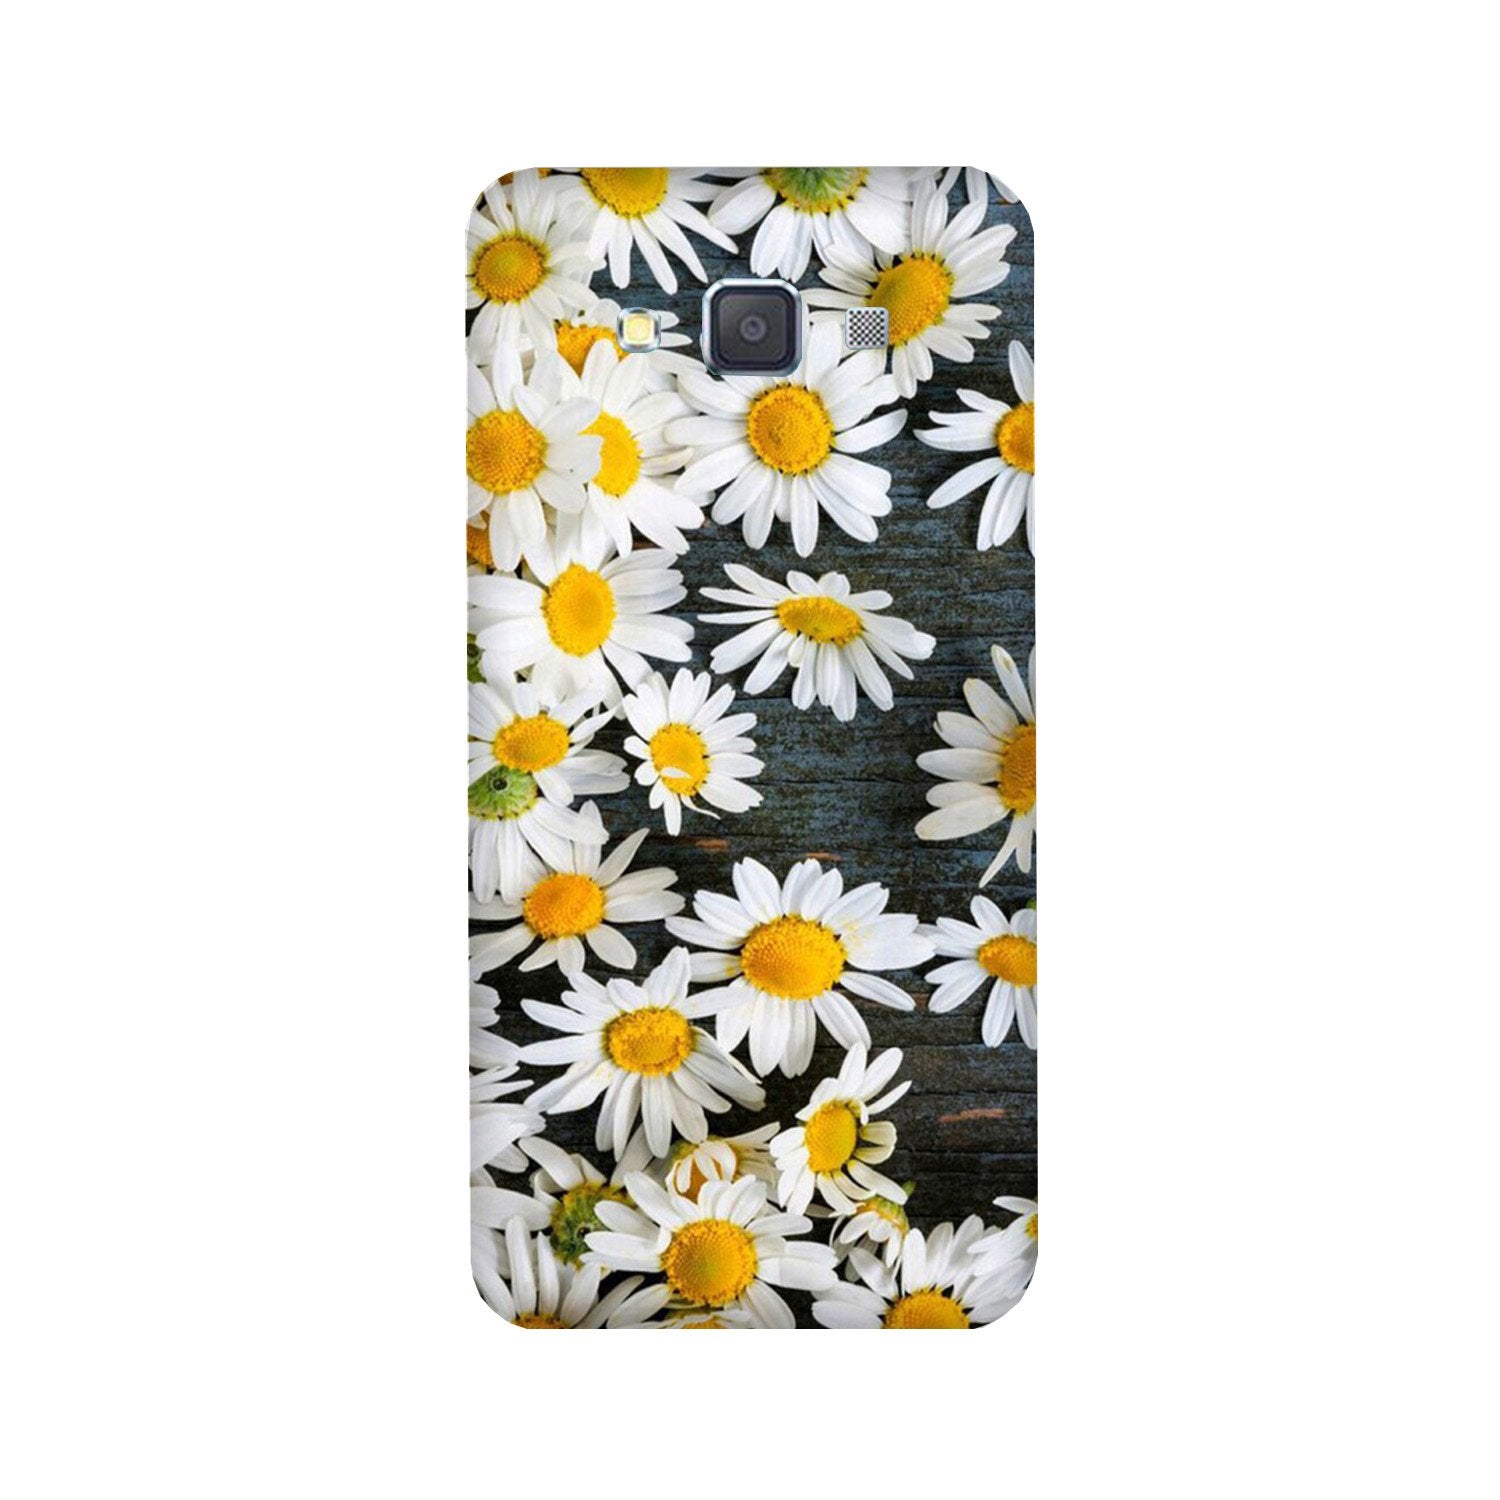 White flowers2 Case for Galaxy Grand 2